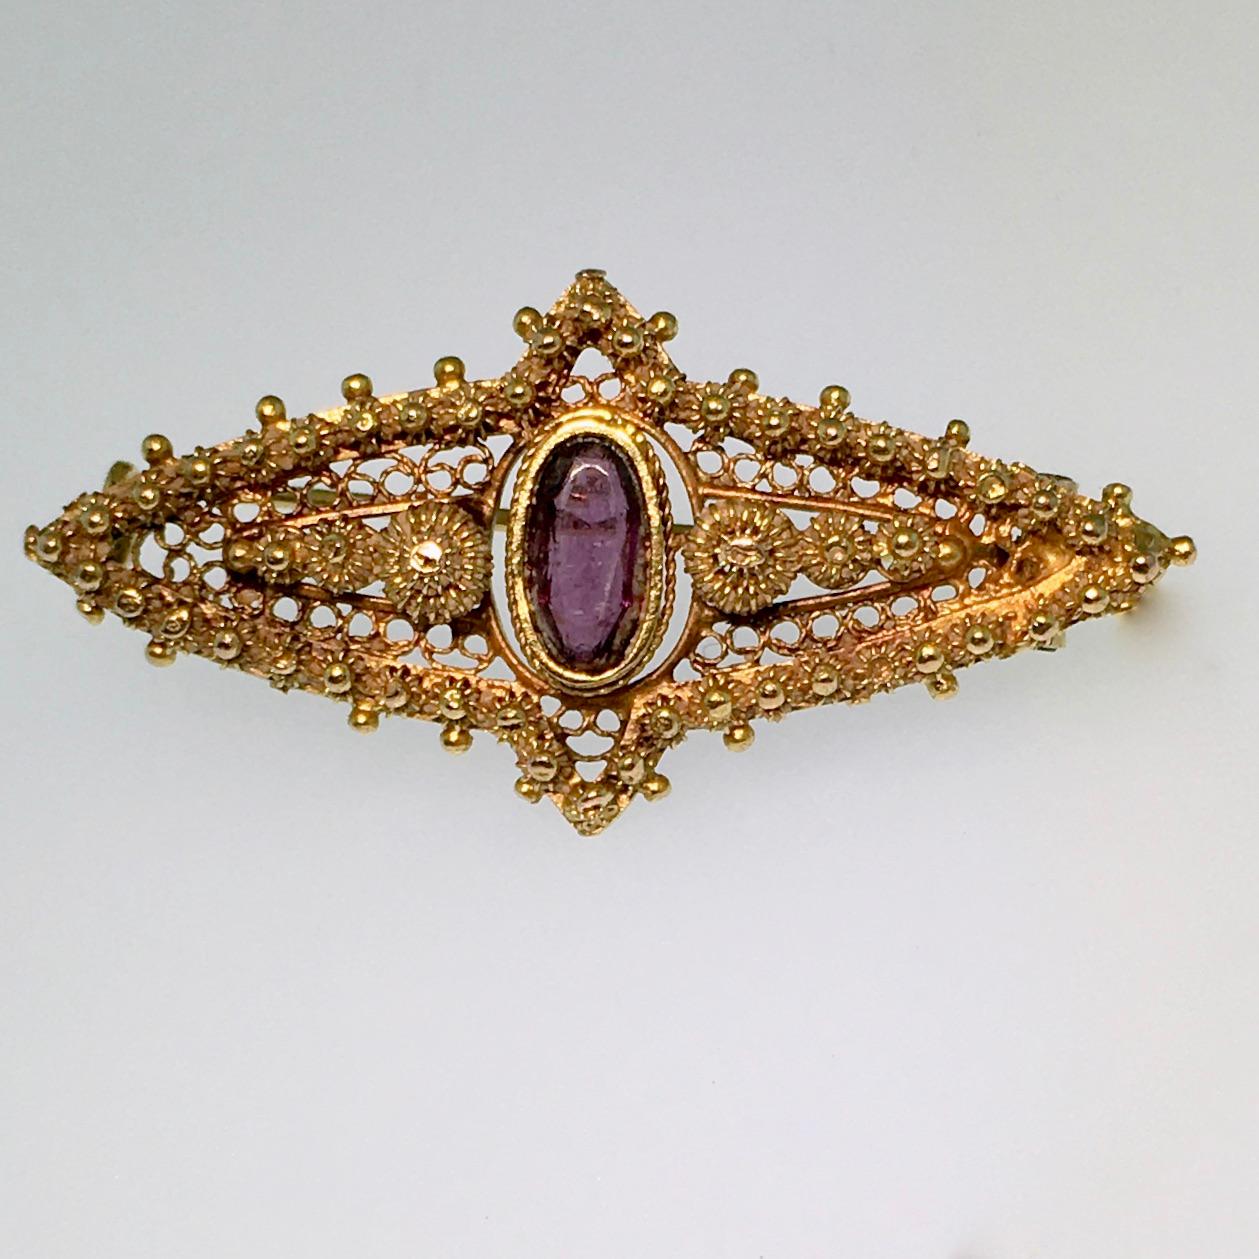 Gold brooch, Victorian period, Antique, set with oval faceted amethyst, periode 1880

This brooch needs no explanation when it comes to the period in which it was made. Obviously Victorian. The safety chain indicates that it is a precious treasure